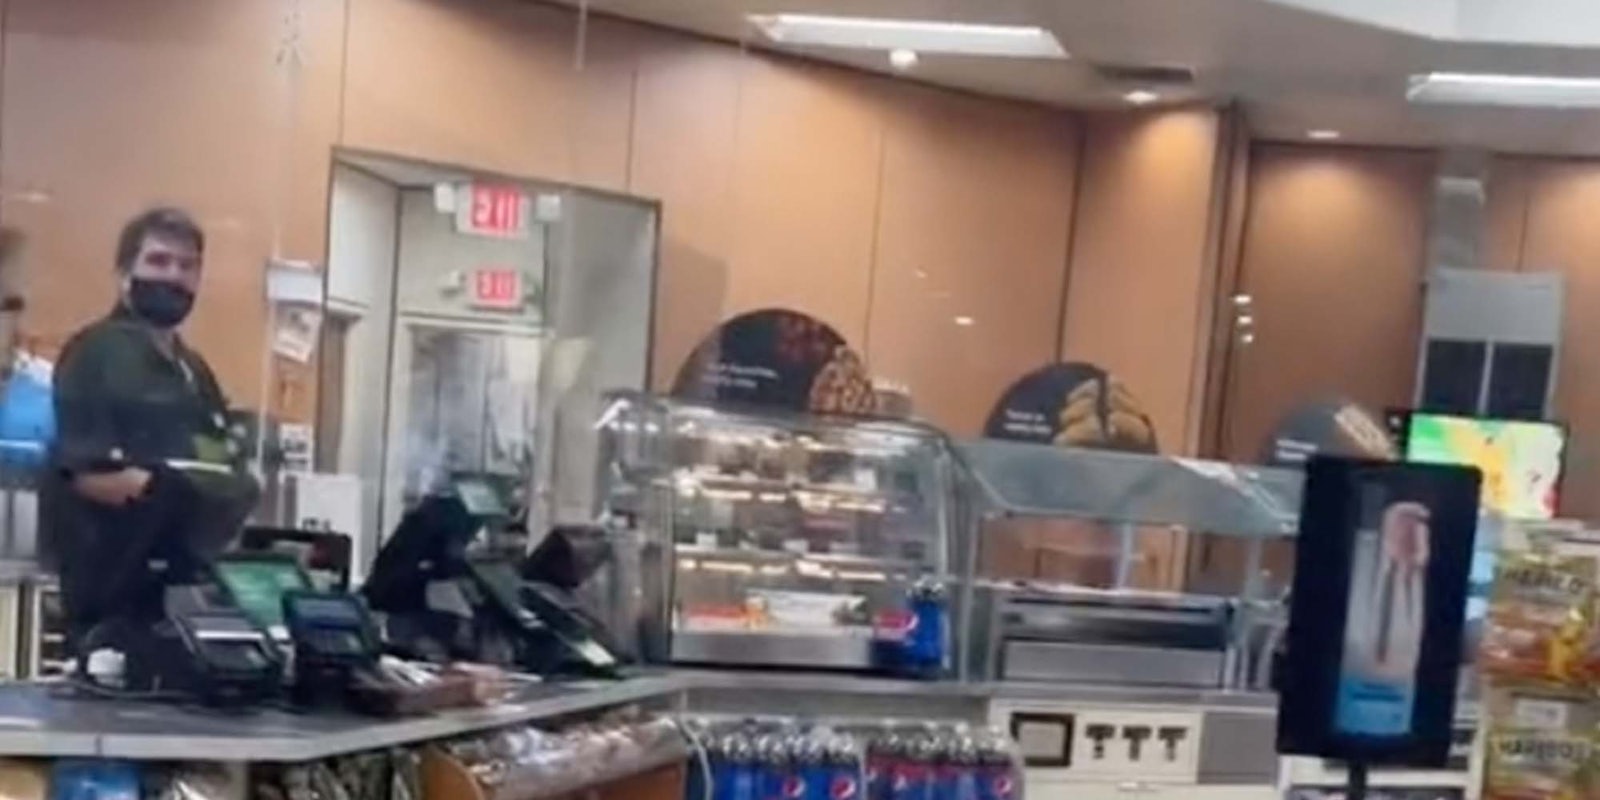 A TikToker brought a 7-11 cashier a plate of hot food during a long shift.